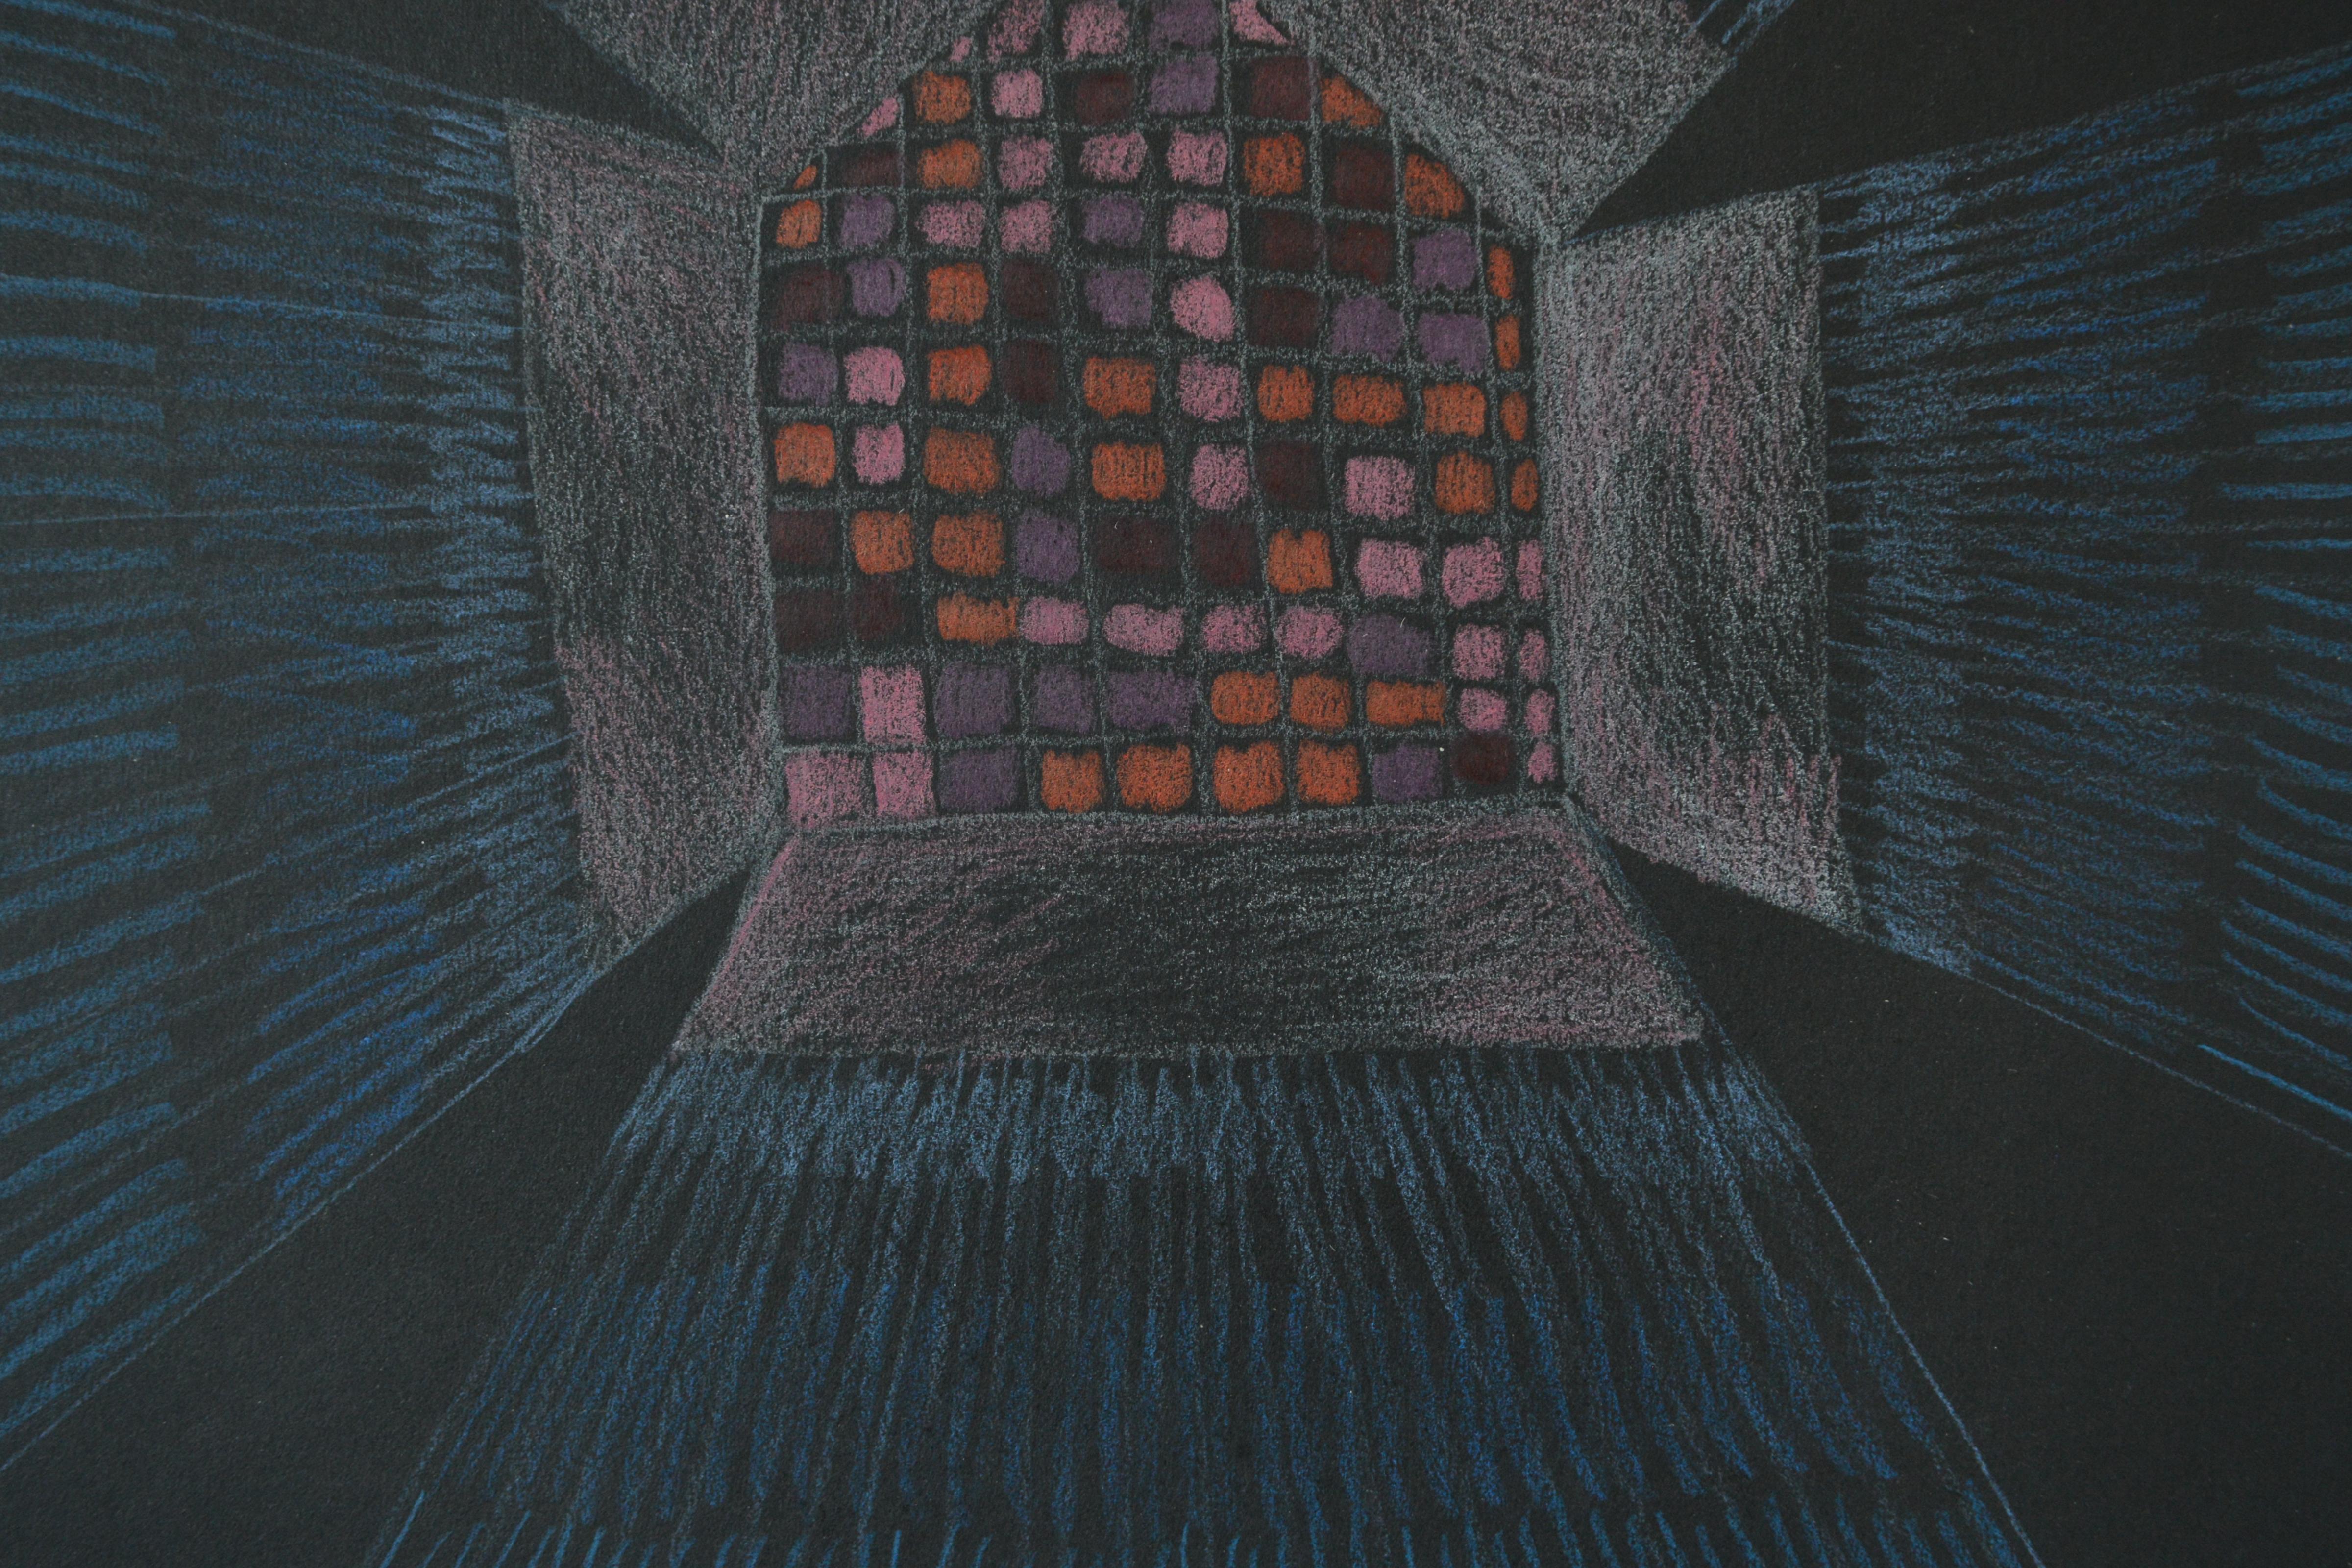 Opening Houses on Black 6, 2022. Coloured pencil on black paper, 20 x 20cm

Nicky Marais (b. 1962) is a Namibian artist, educator and activist. Marais is well-known for her abstract artworks created using a personal vocabulary of abstract forms and